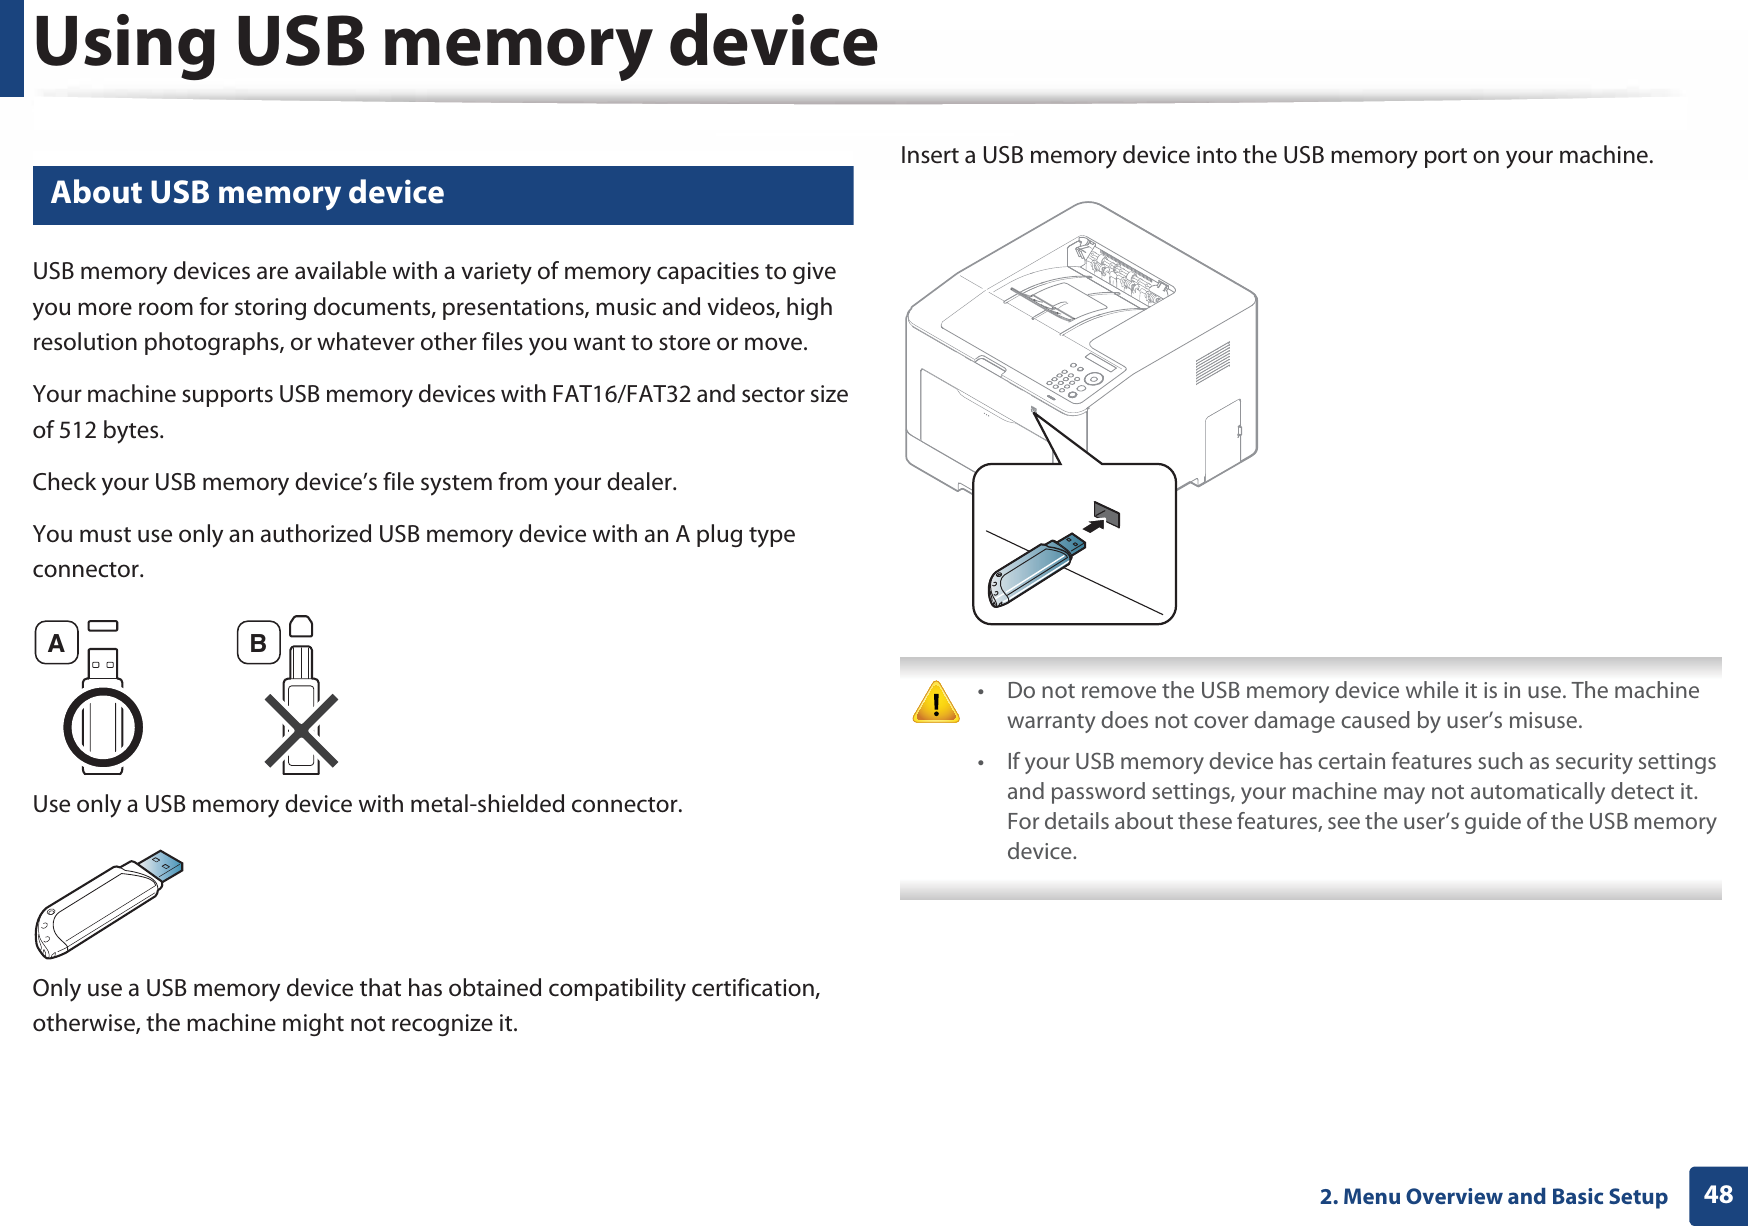 482. Menu Overview and Basic SetupUsing USB memory device13 About USB memory deviceUSB memory devices are available with a variety of memory capacities to give you more room for storing documents, presentations, music and videos, high resolution photographs, or whatever other files you want to store or move.Your machine supports USB memory devices with FAT16/FAT32 and sector size of 512 bytes.Check your USB memory device’s file system from your dealer.You must use only an authorized USB memory device with an A plug type connector.Use only a USB memory device with metal-shielded connector.Only use a USB memory device that has obtained compatibility certification, otherwise, the machine might not recognize it.Insert a USB memory device into the USB memory port on your machine. • Do not remove the USB memory device while it is in use. The machine warranty does not cover damage caused by user’s misuse.• If your USB memory device has certain features such as security settings and password settings, your machine may not automatically detect it. For details about these features, see the user’s guide of the USB memory device. A B